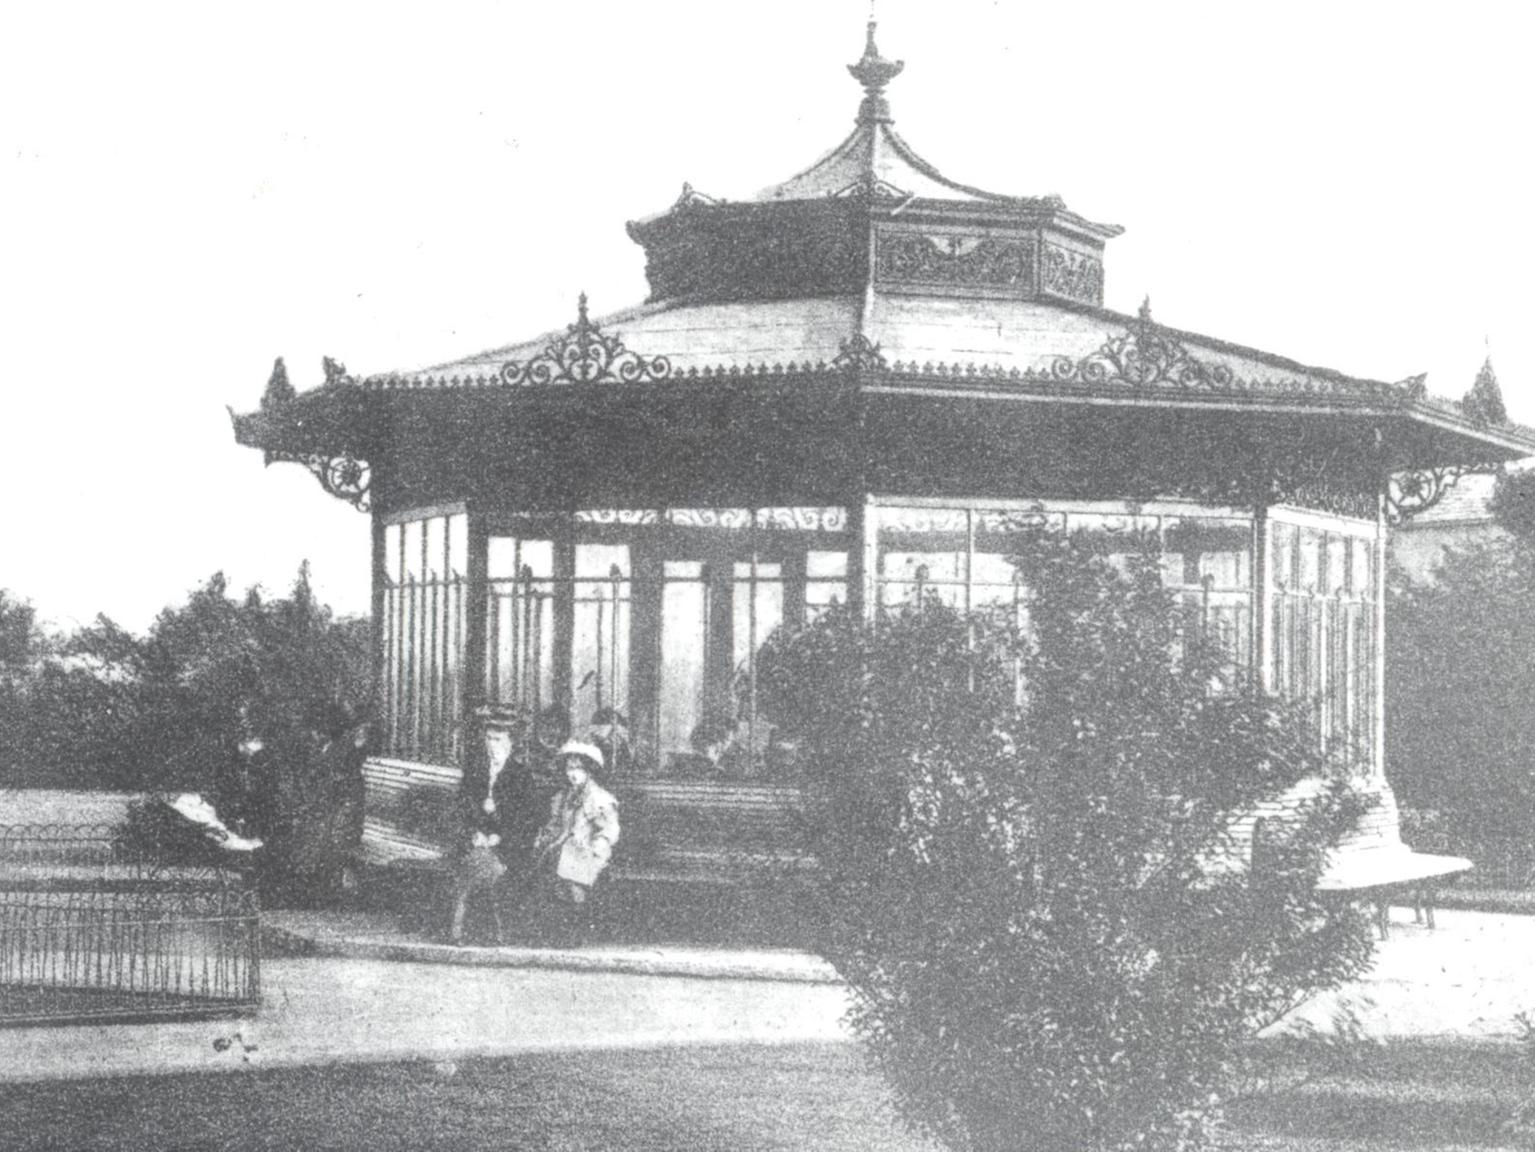 The 'old man's shelter' in Cross Flatts Park. In the background on thew left is the top of the bandstand where two brass bands played on Sunday afternoon.